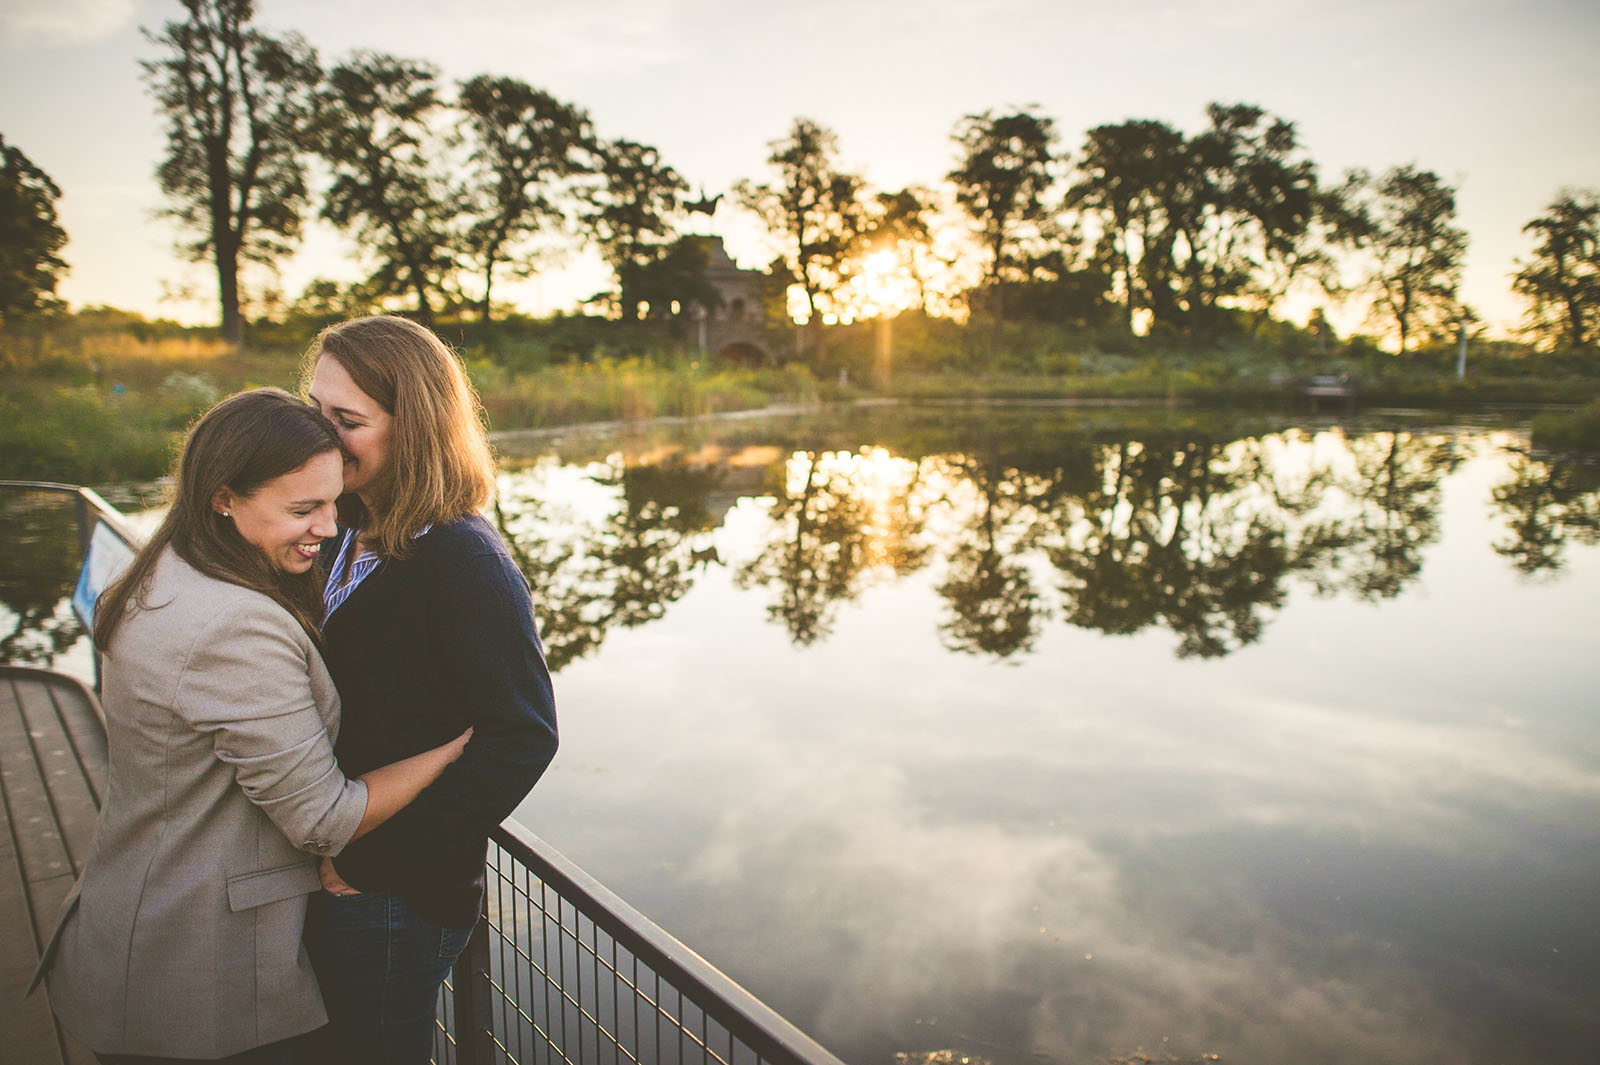 04 south pond lake - Kim + Angie // Lincoln Park Engagement Session